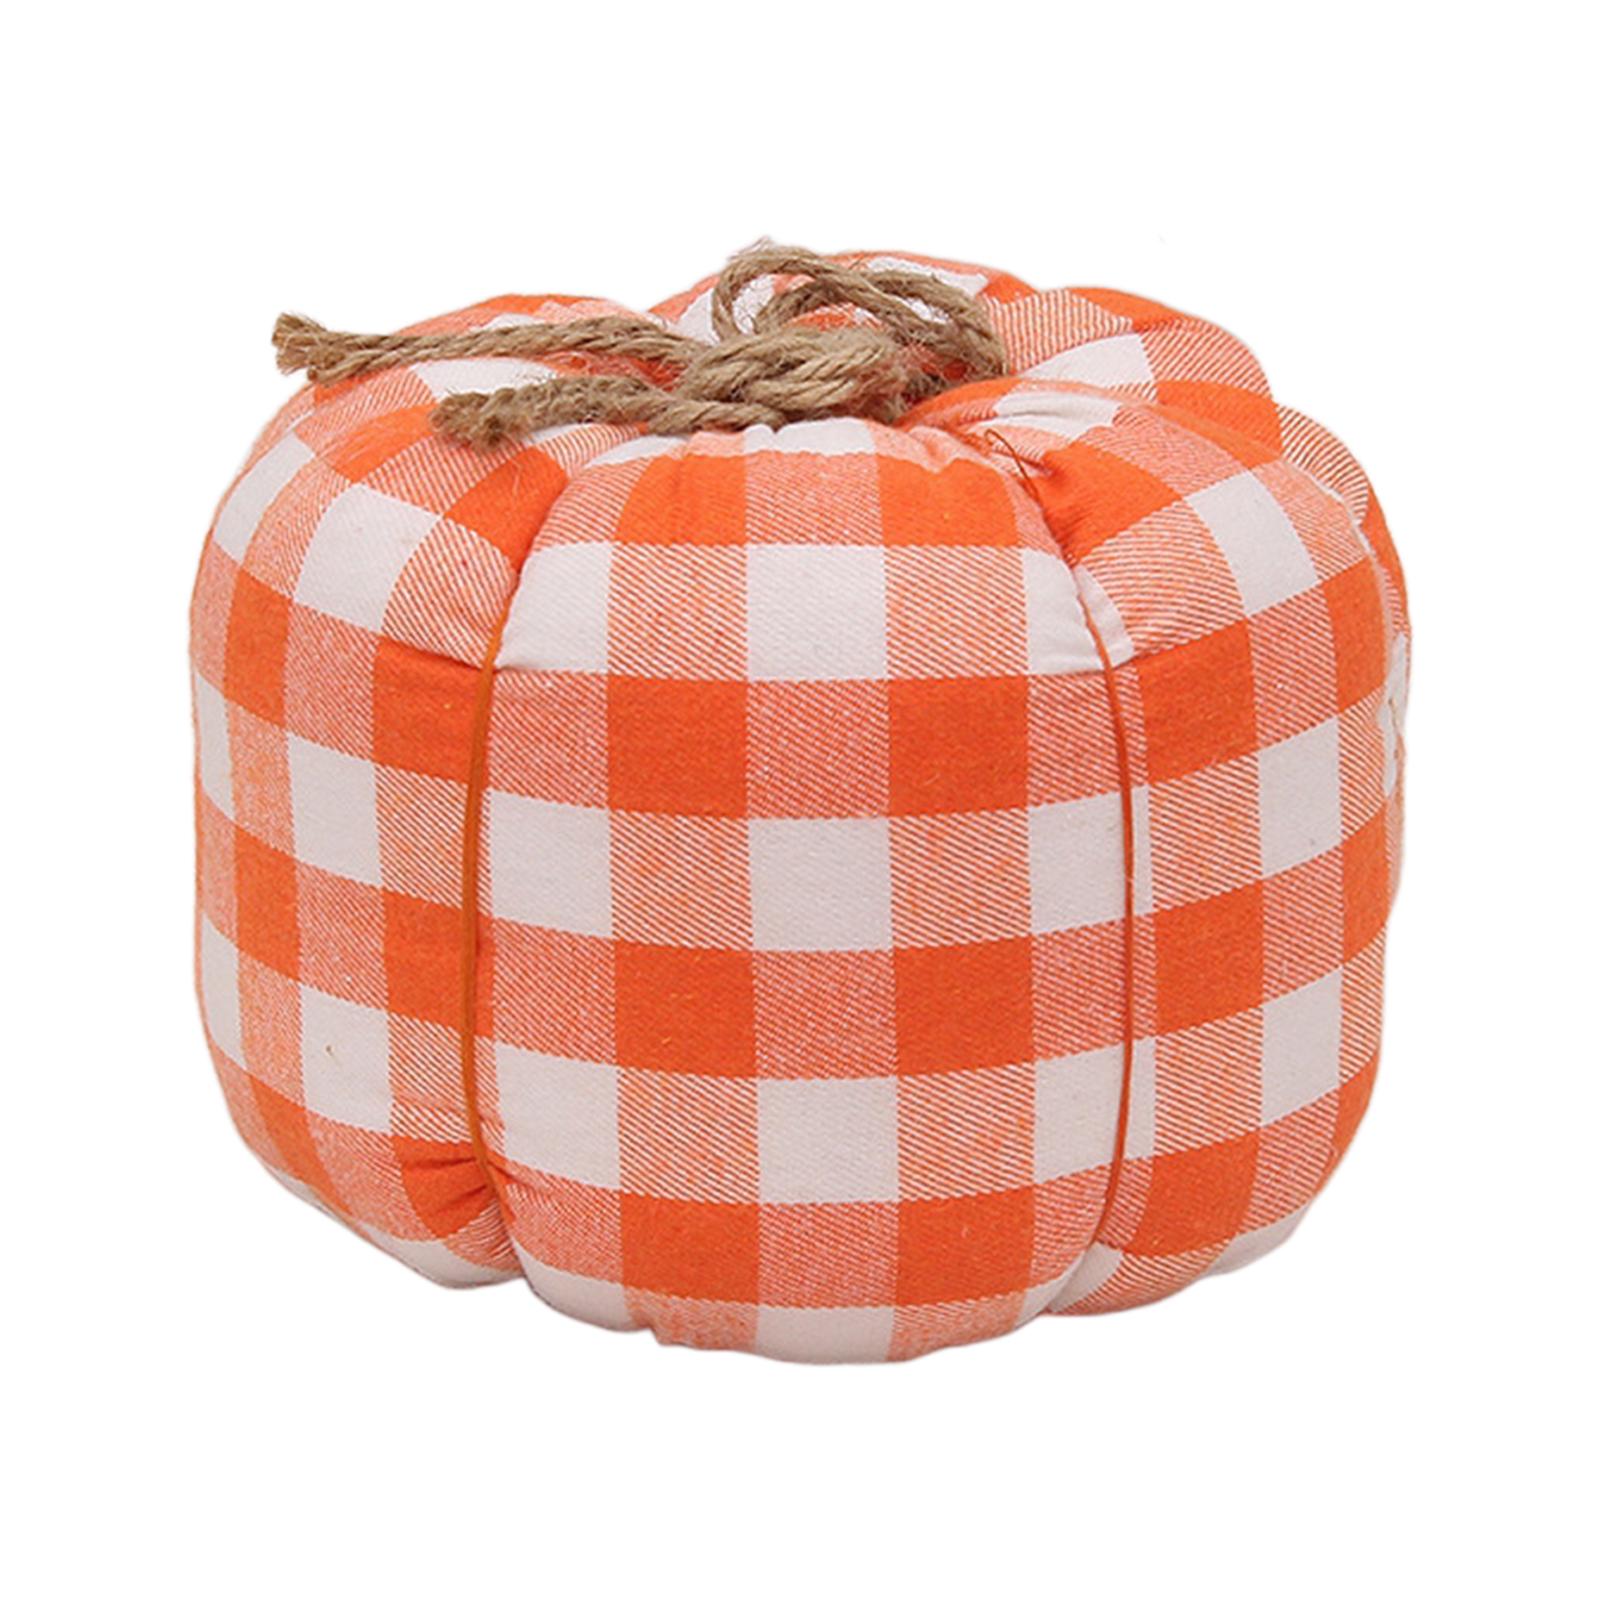 Plaid Fabric Pumpkin Thanksgiving Autumn Harvest for Home Fireplace Holiday 19cmx15cm